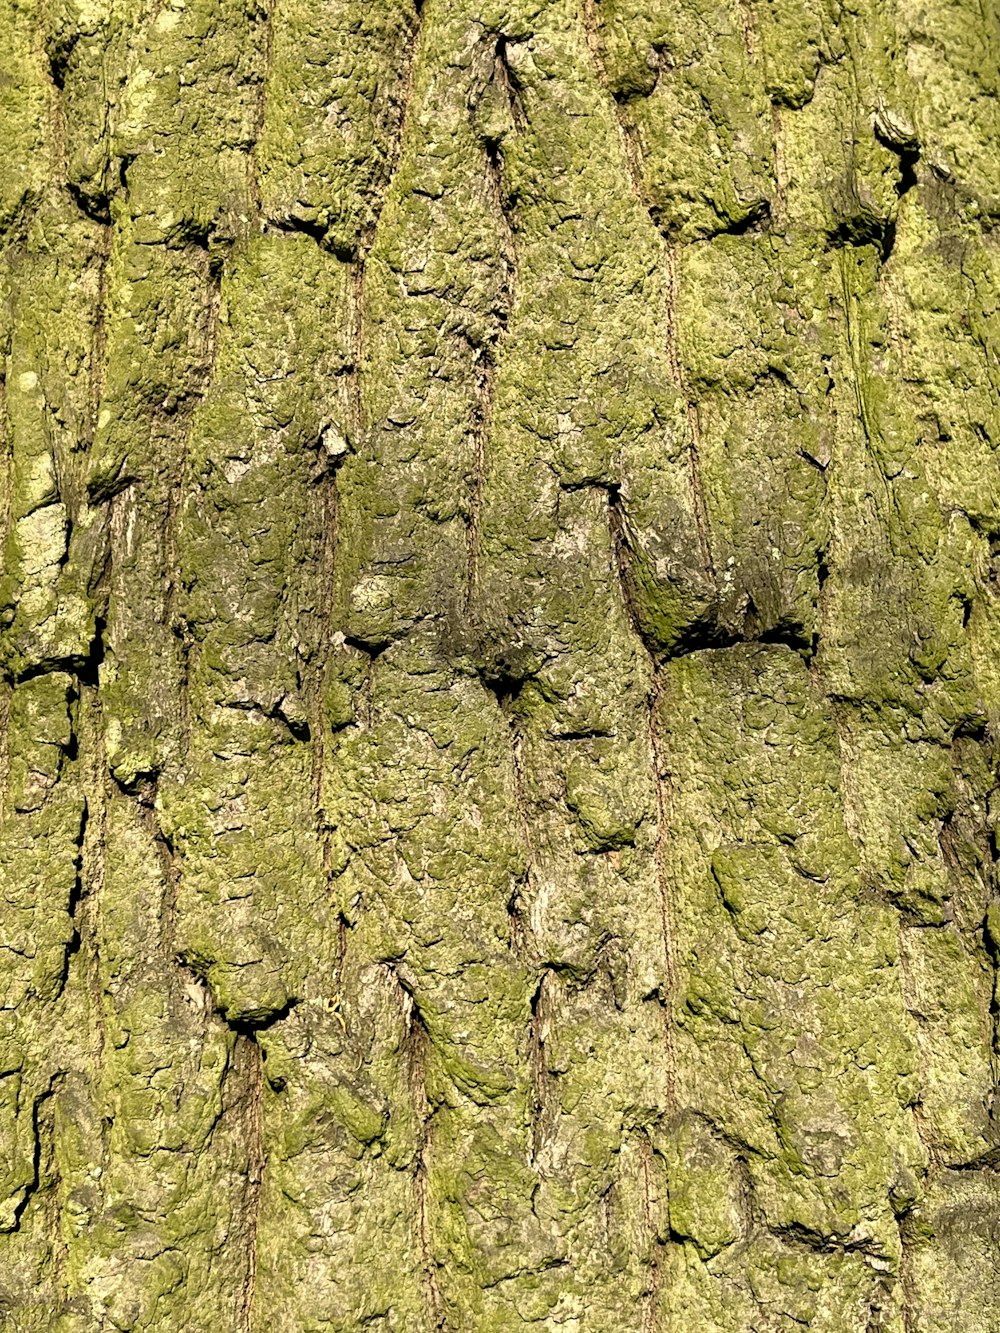 a close up of a tree trunk with moss growing on it